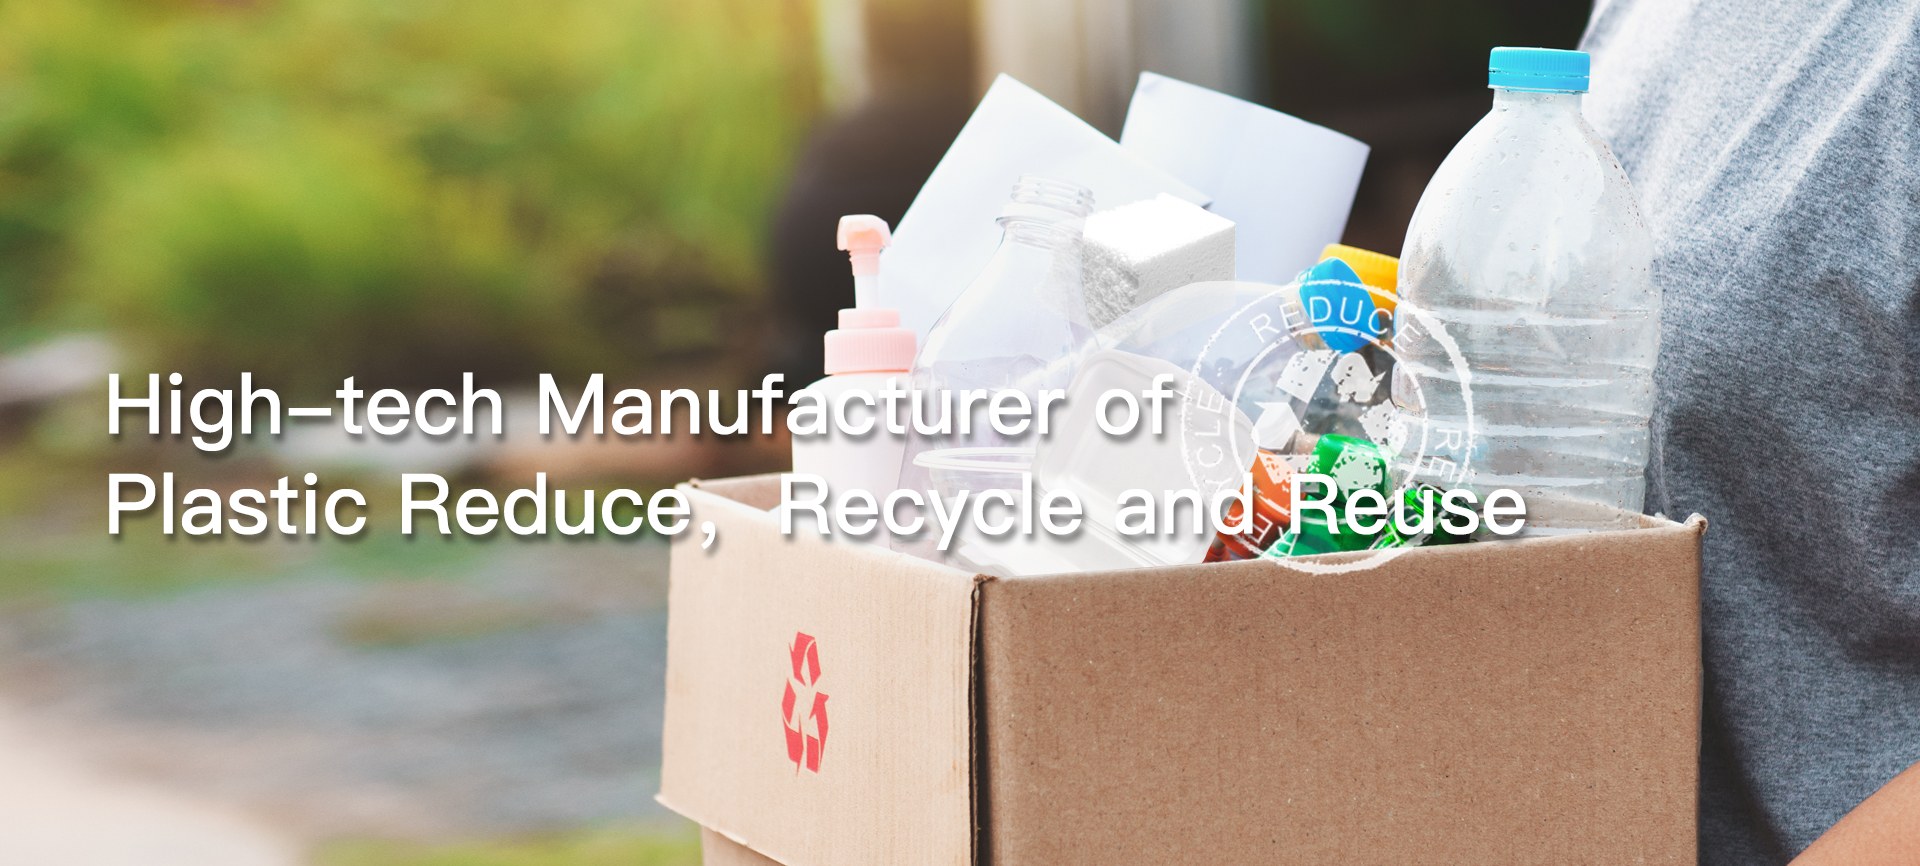 Intco is a global leader of plastic reduce, recycle, and reuse.